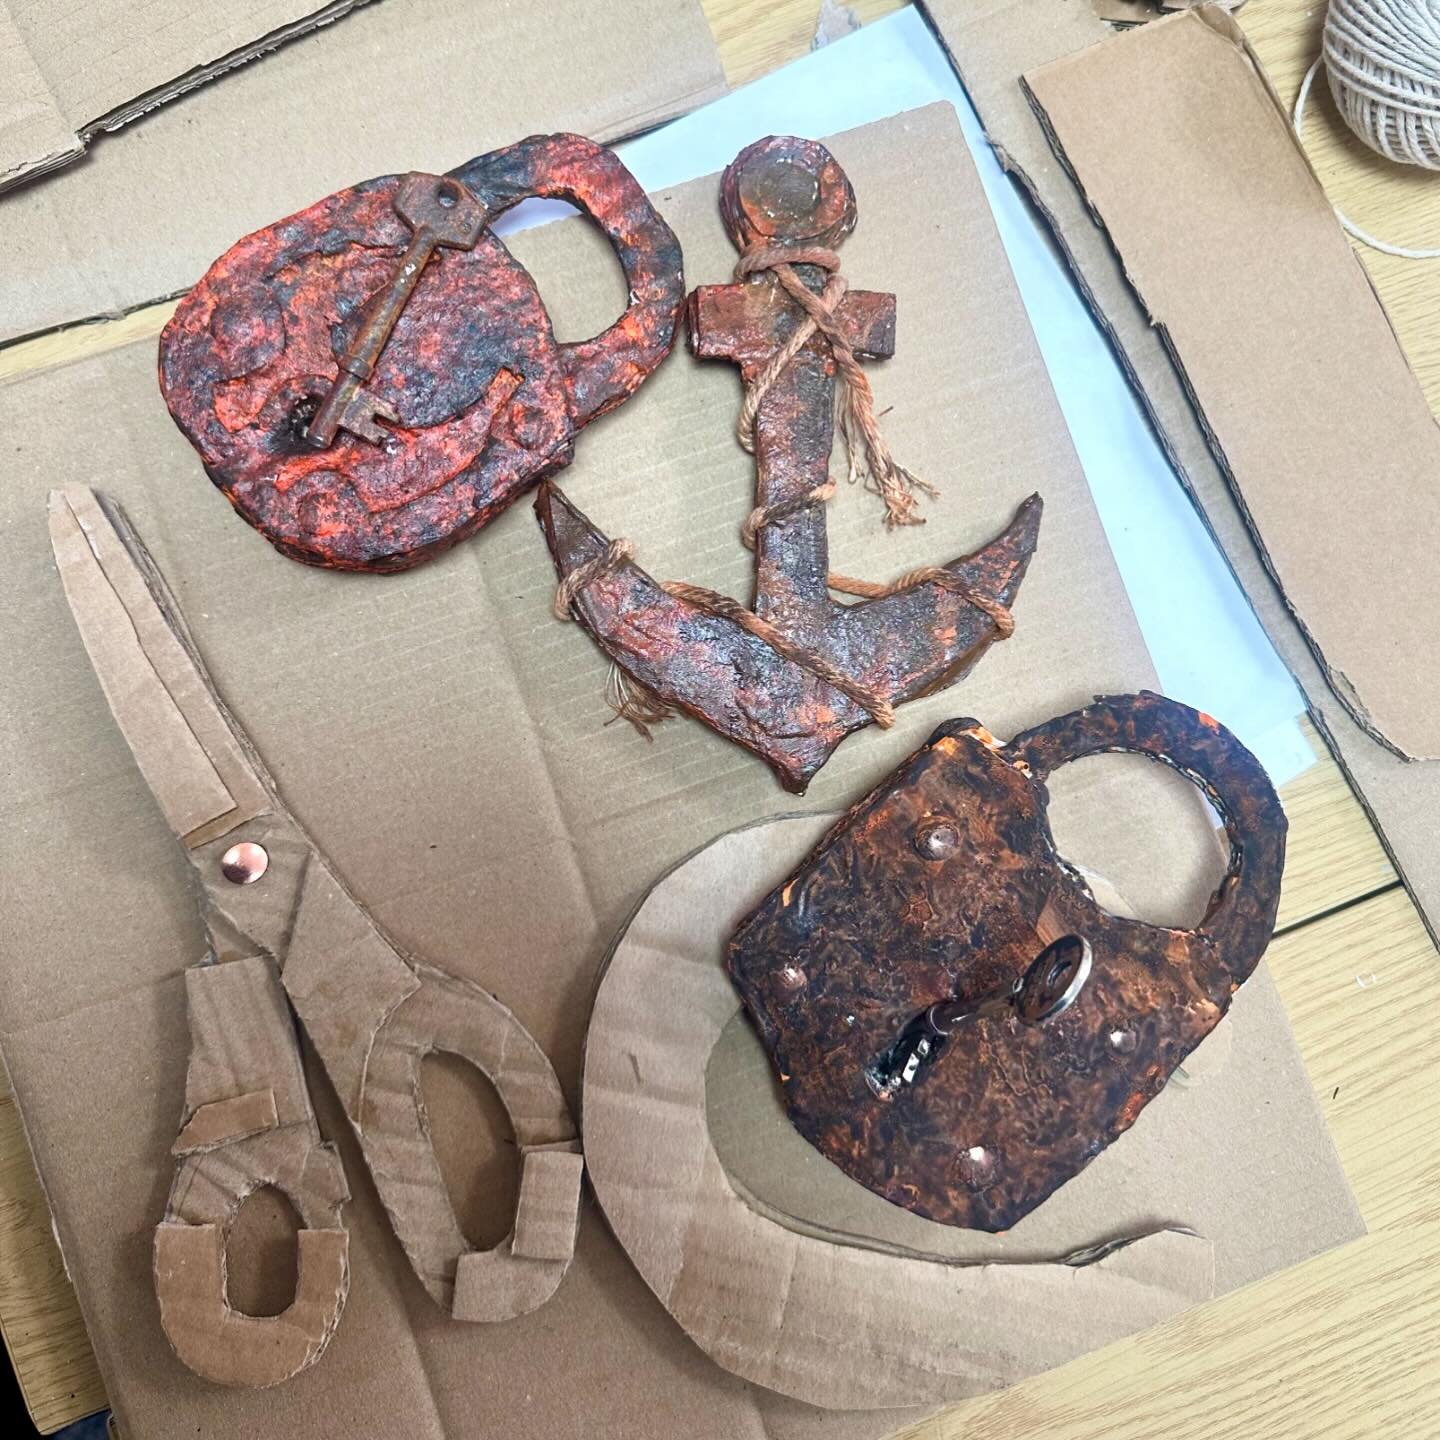 Rusty dusty objects beautifully made by our students using cardboard, plaster of Paris mixed in with pva glue and some paint!!